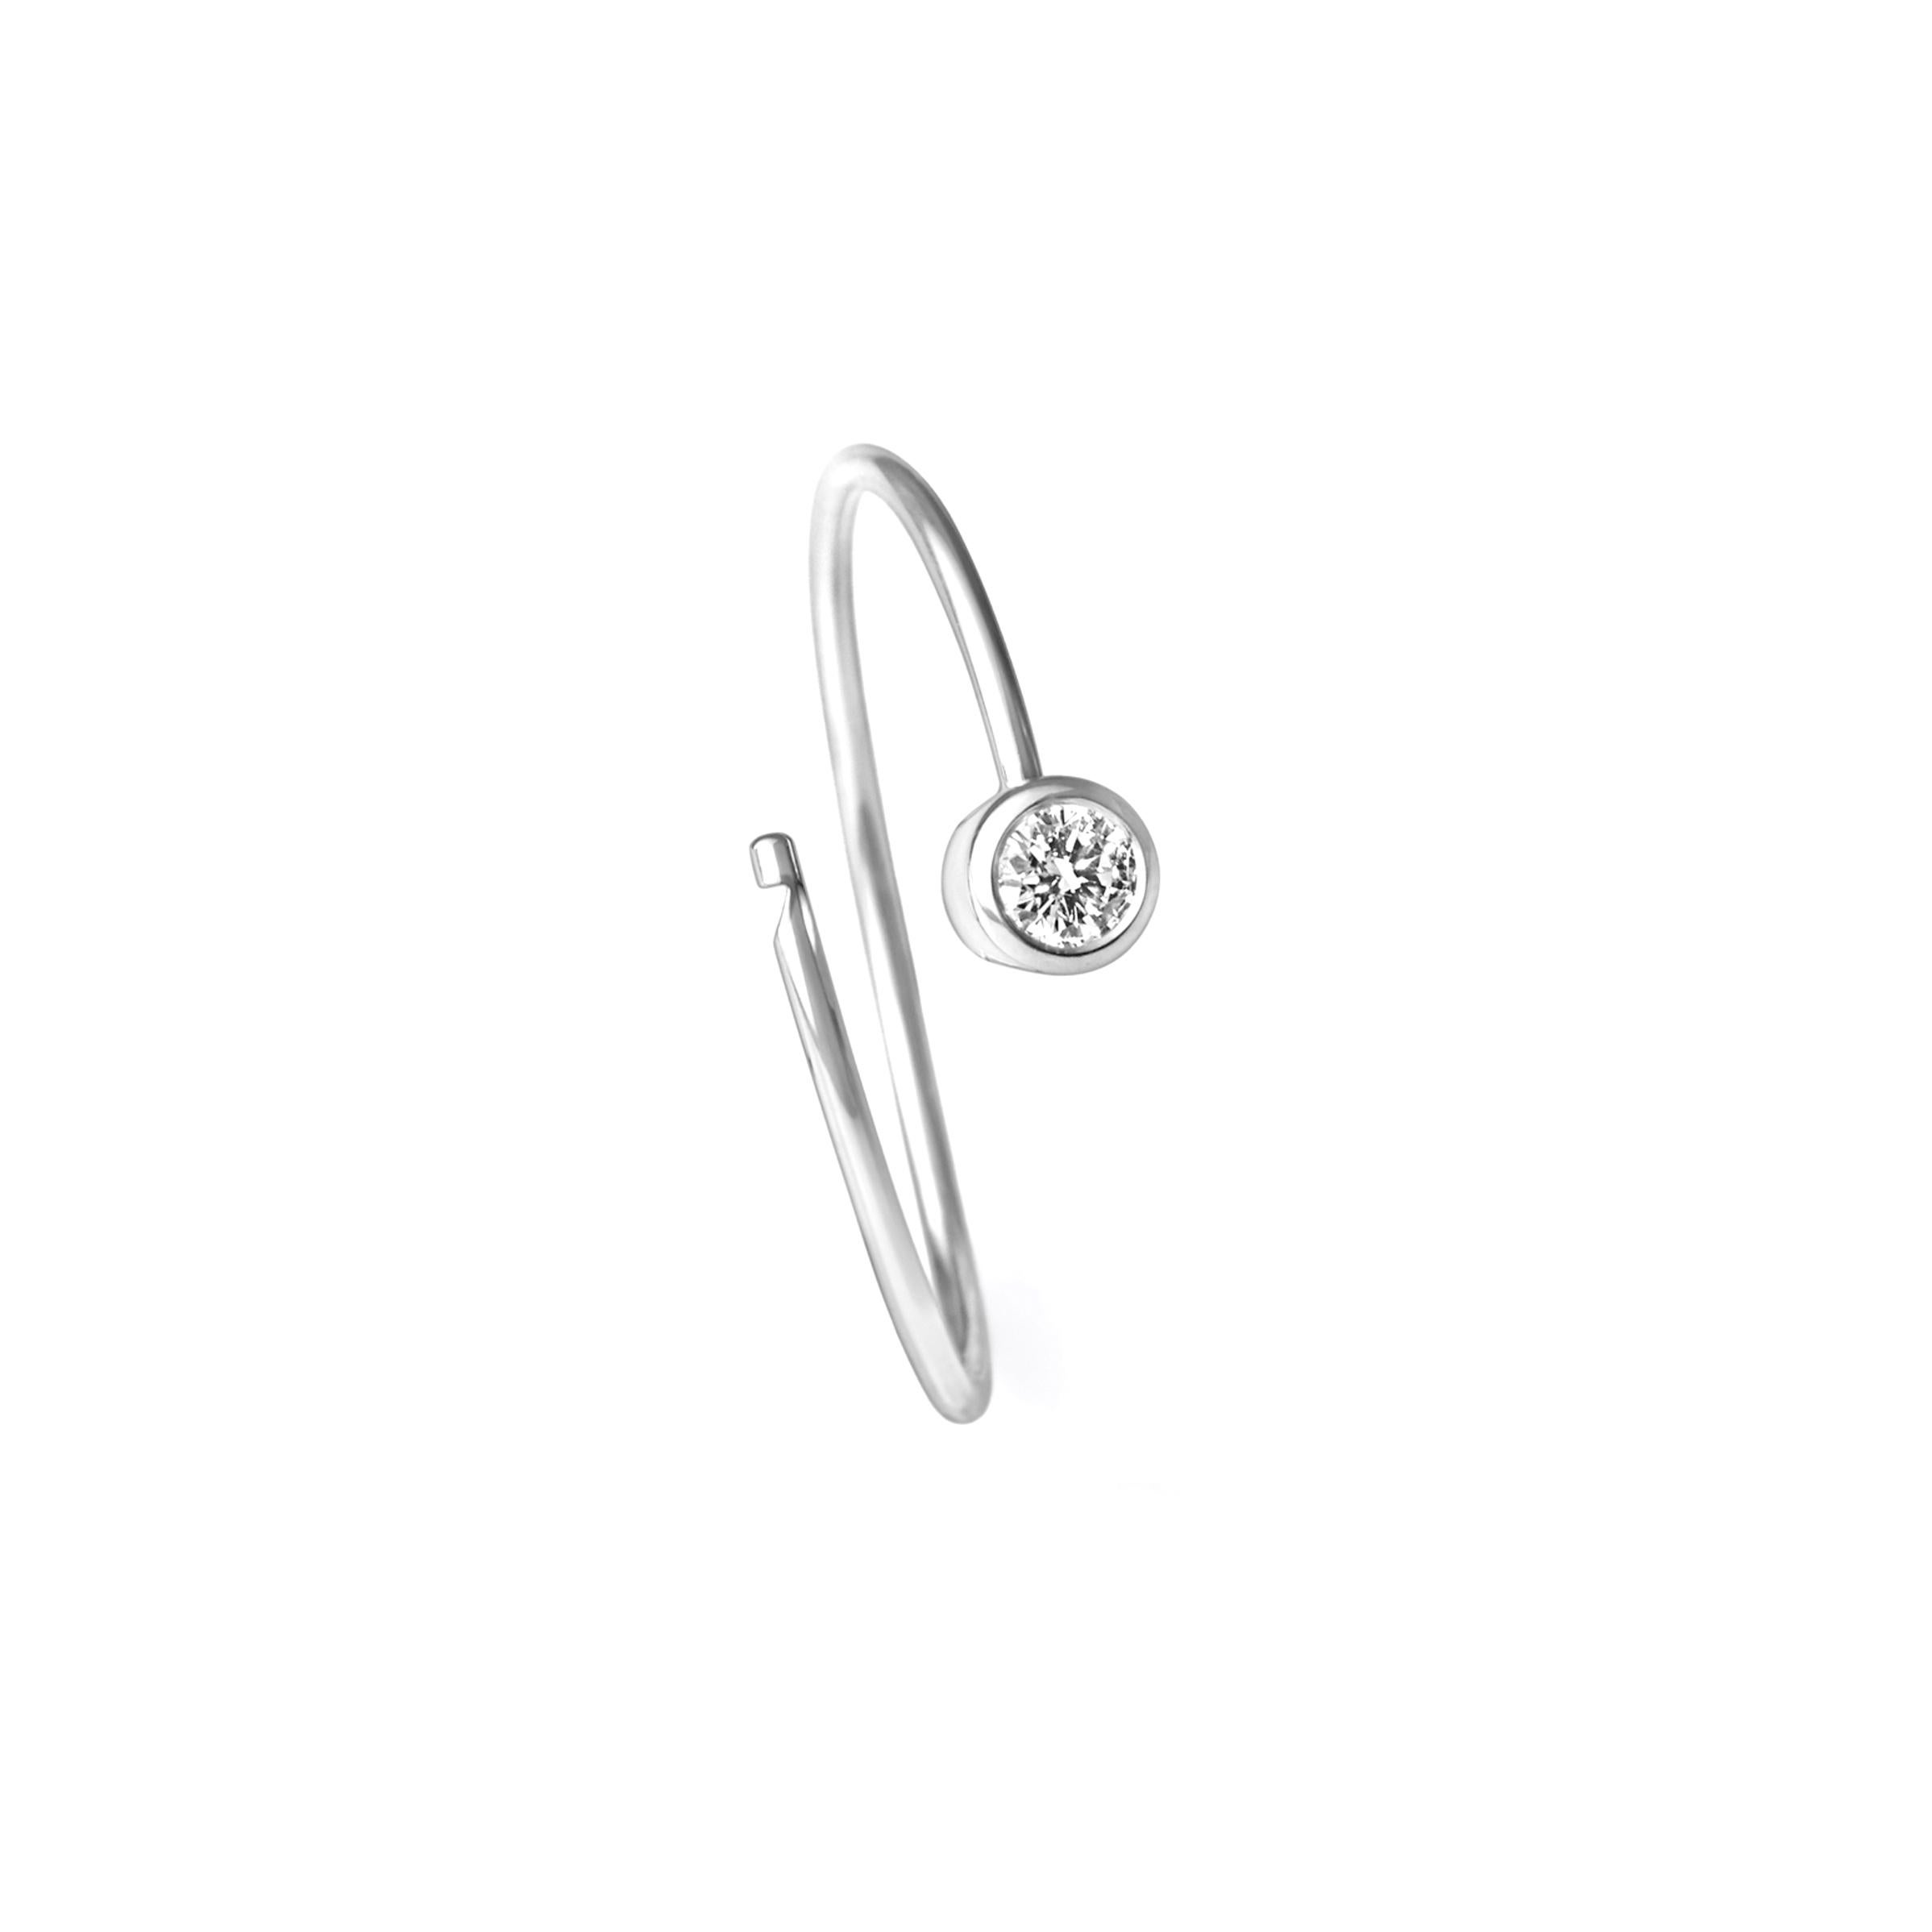 A single stone diamond hoop earring. The wire tension allows for a seamless circular post that hooks in place at the hidden clasp behind the stone. 

Diamond size 0.06ct
Setting diameter: 3.4mm
Hoop diameter 17mm
Wire width 0.9mm
Sold as a